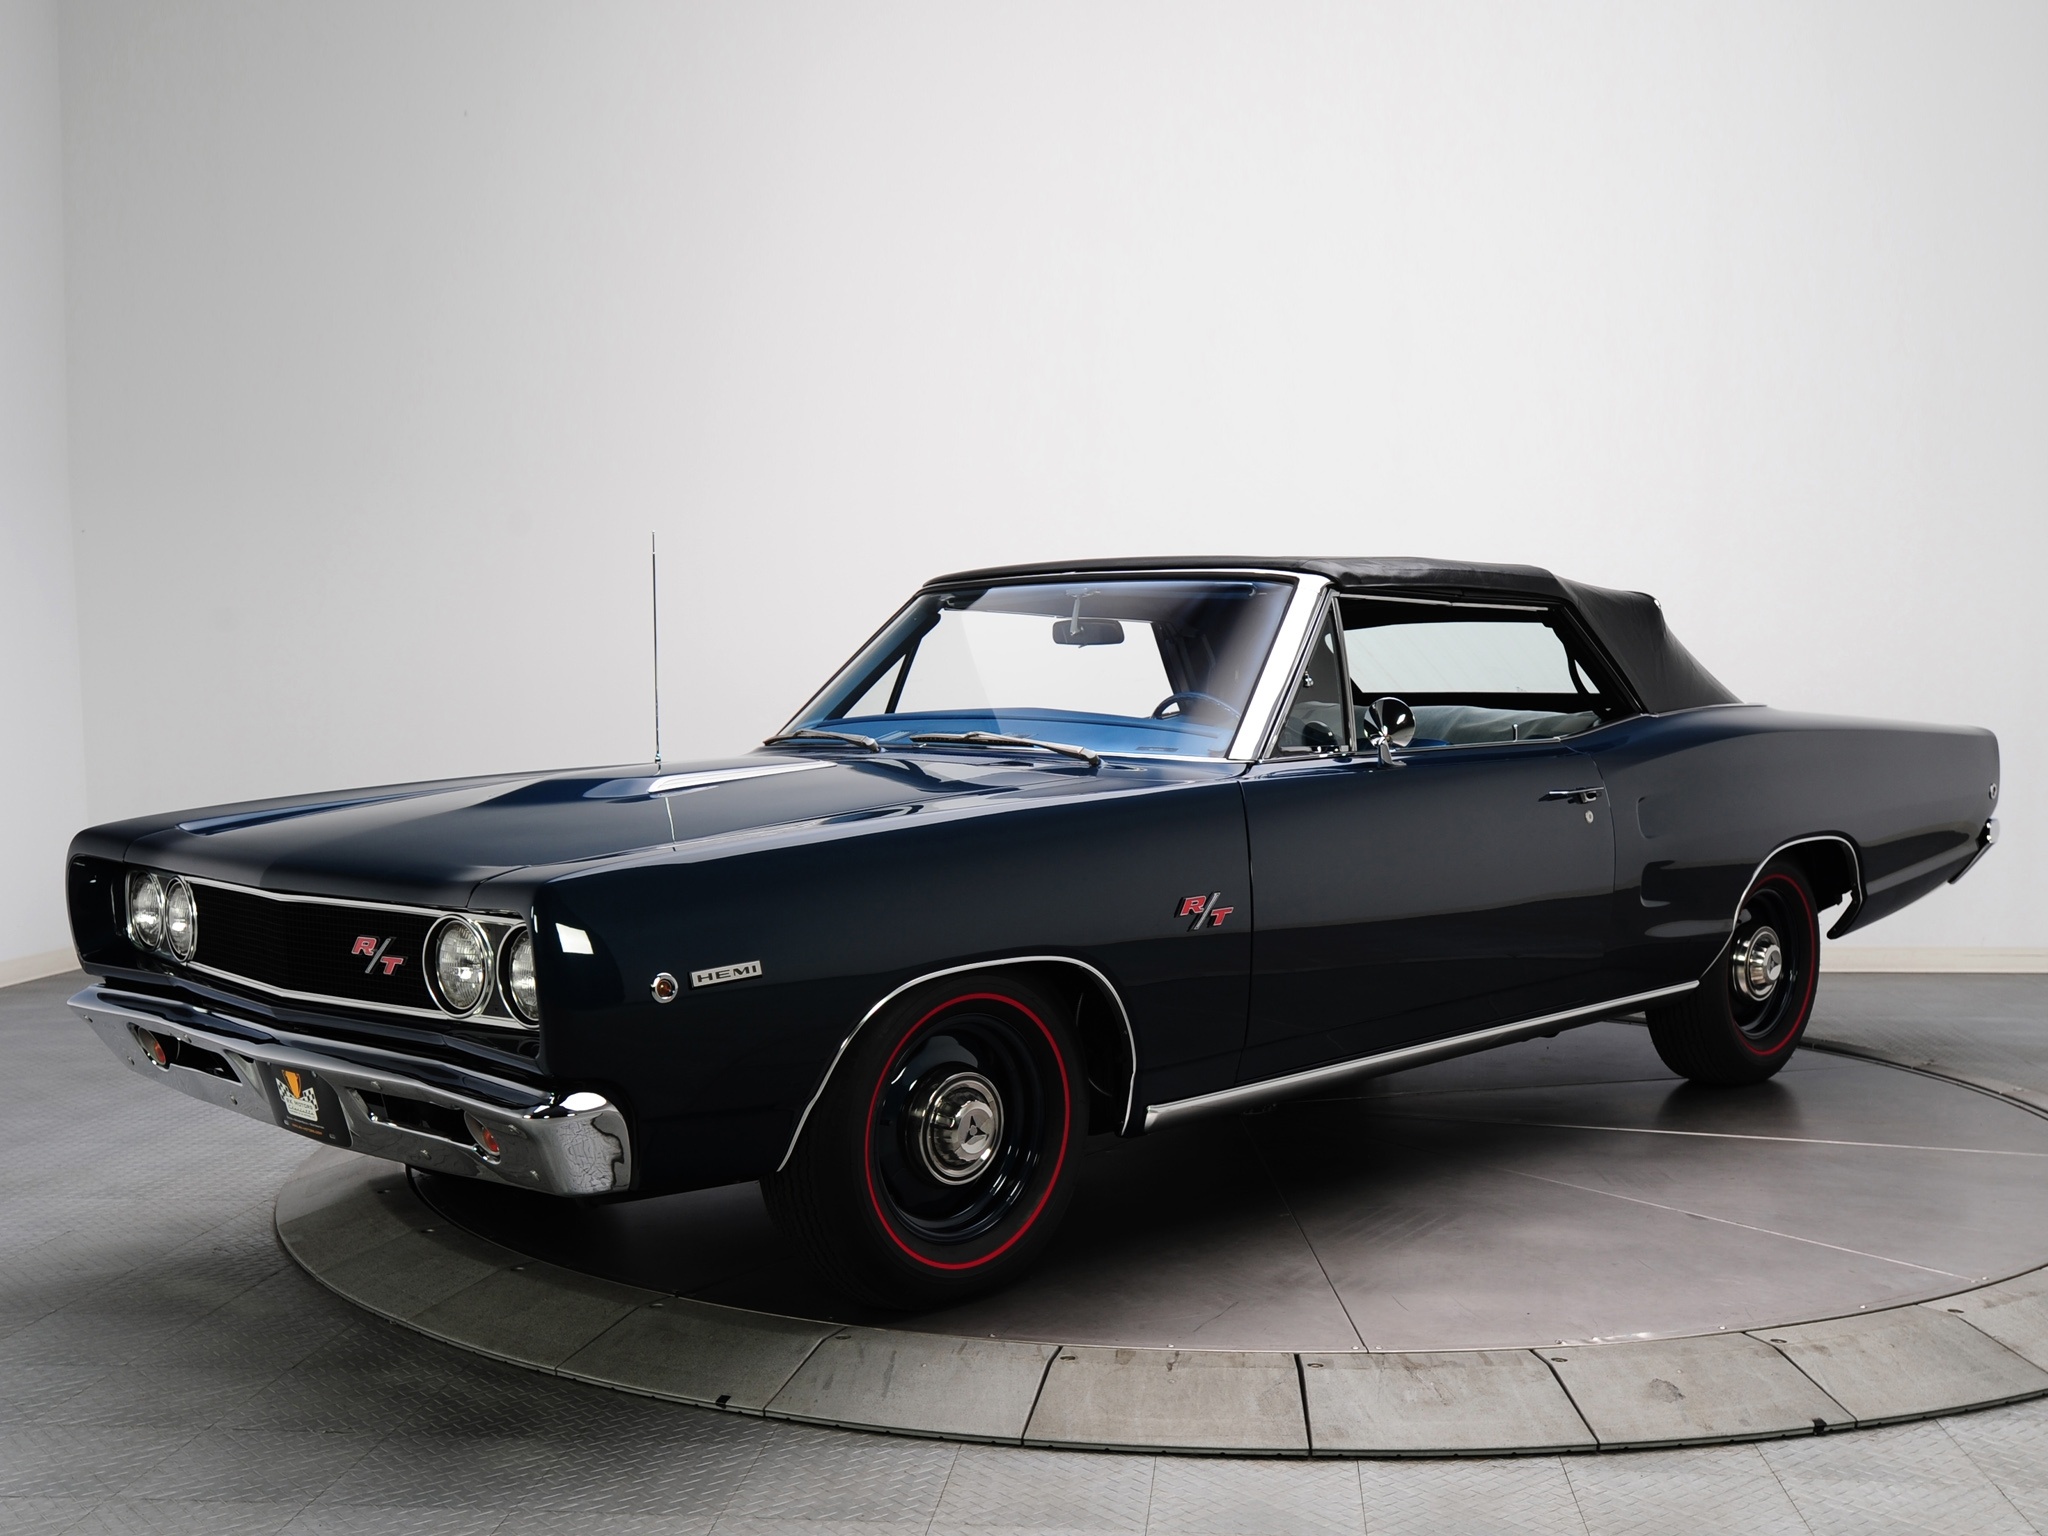 Coronet, Dodge Coronet, Convertible wallpapers, High-quality pictures, 2050x1540 HD Desktop